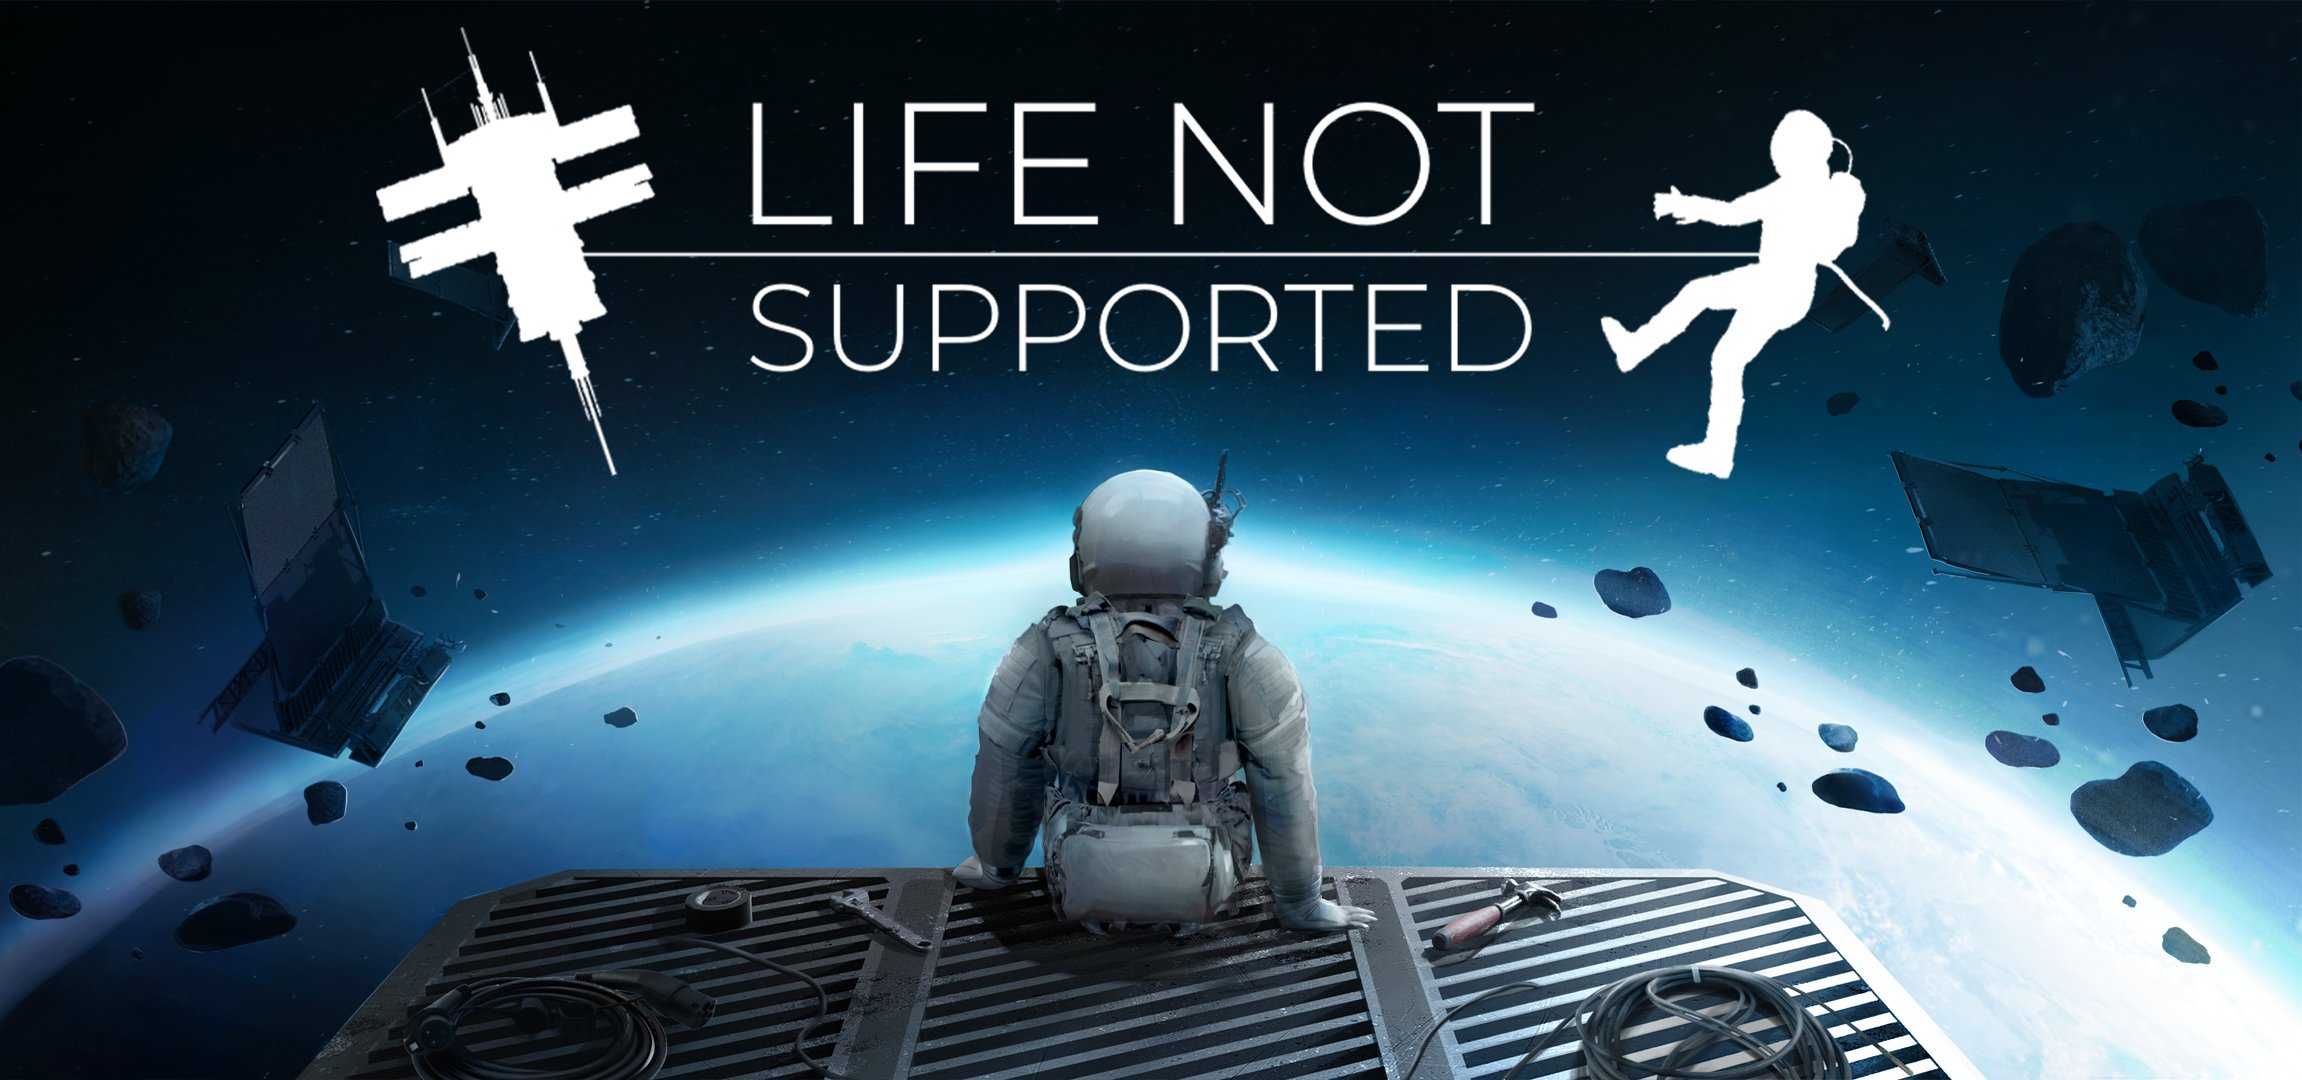 Life Not Supported